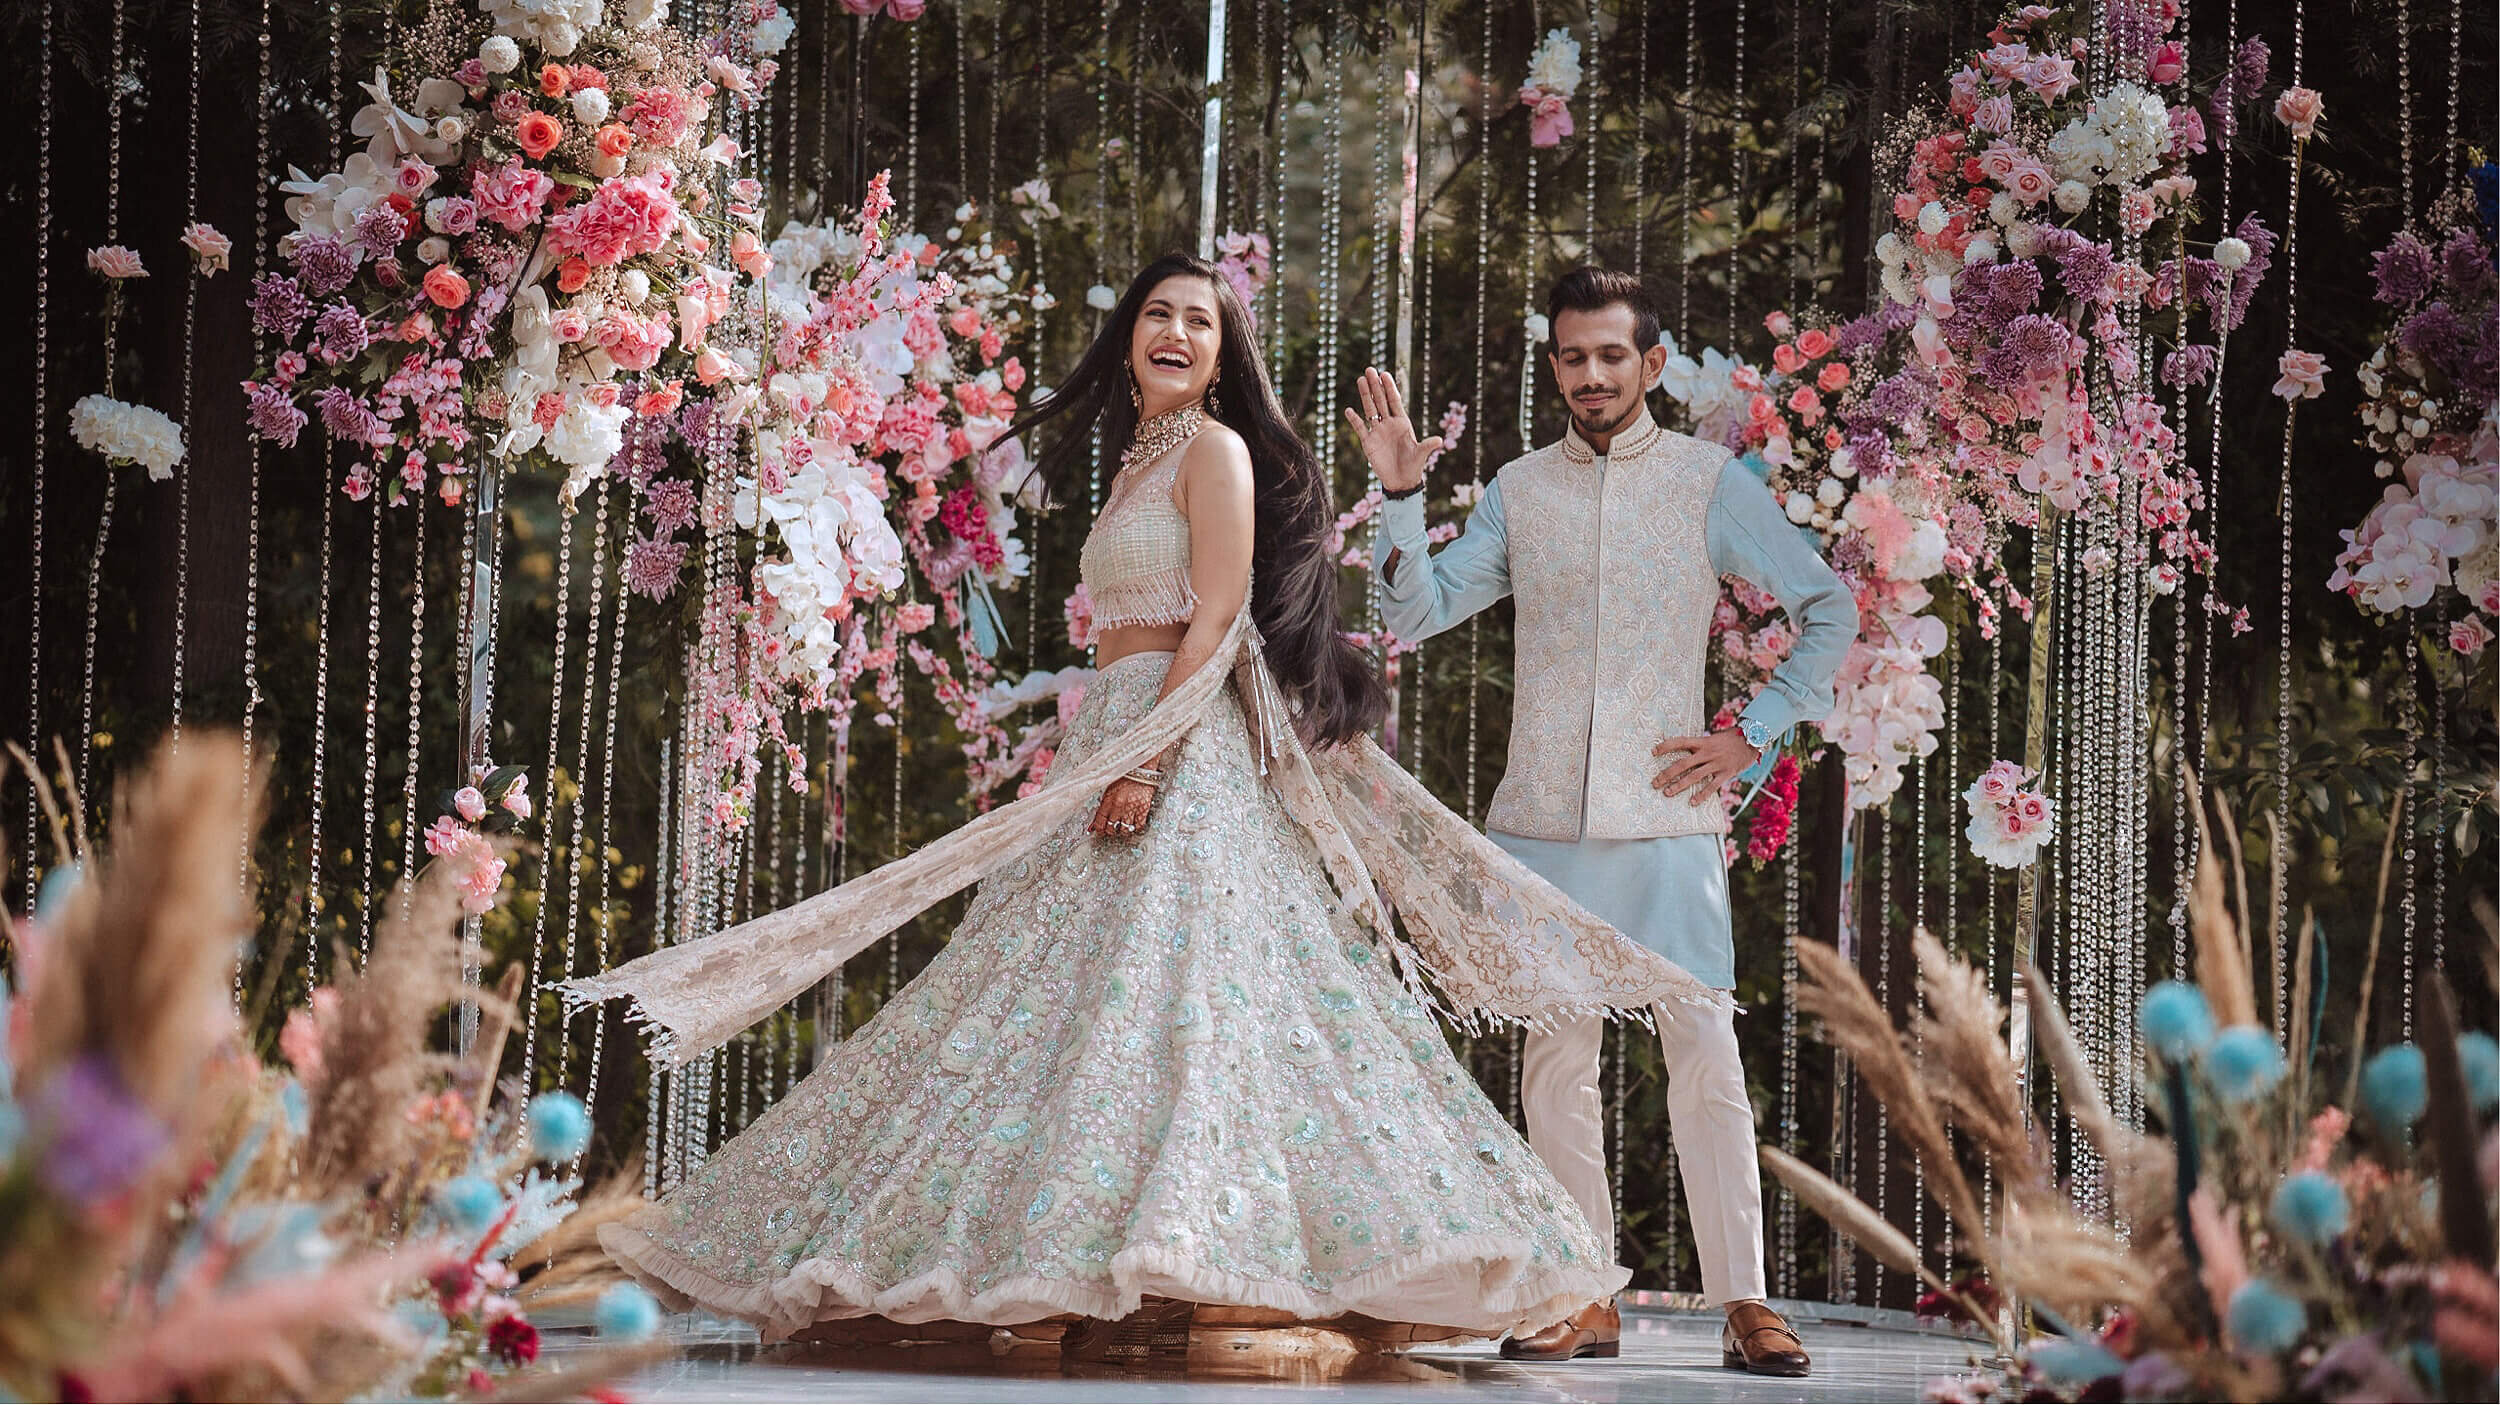 Celebrity Wedding Photographers That Bollywood Stars Pick For Their D-Day